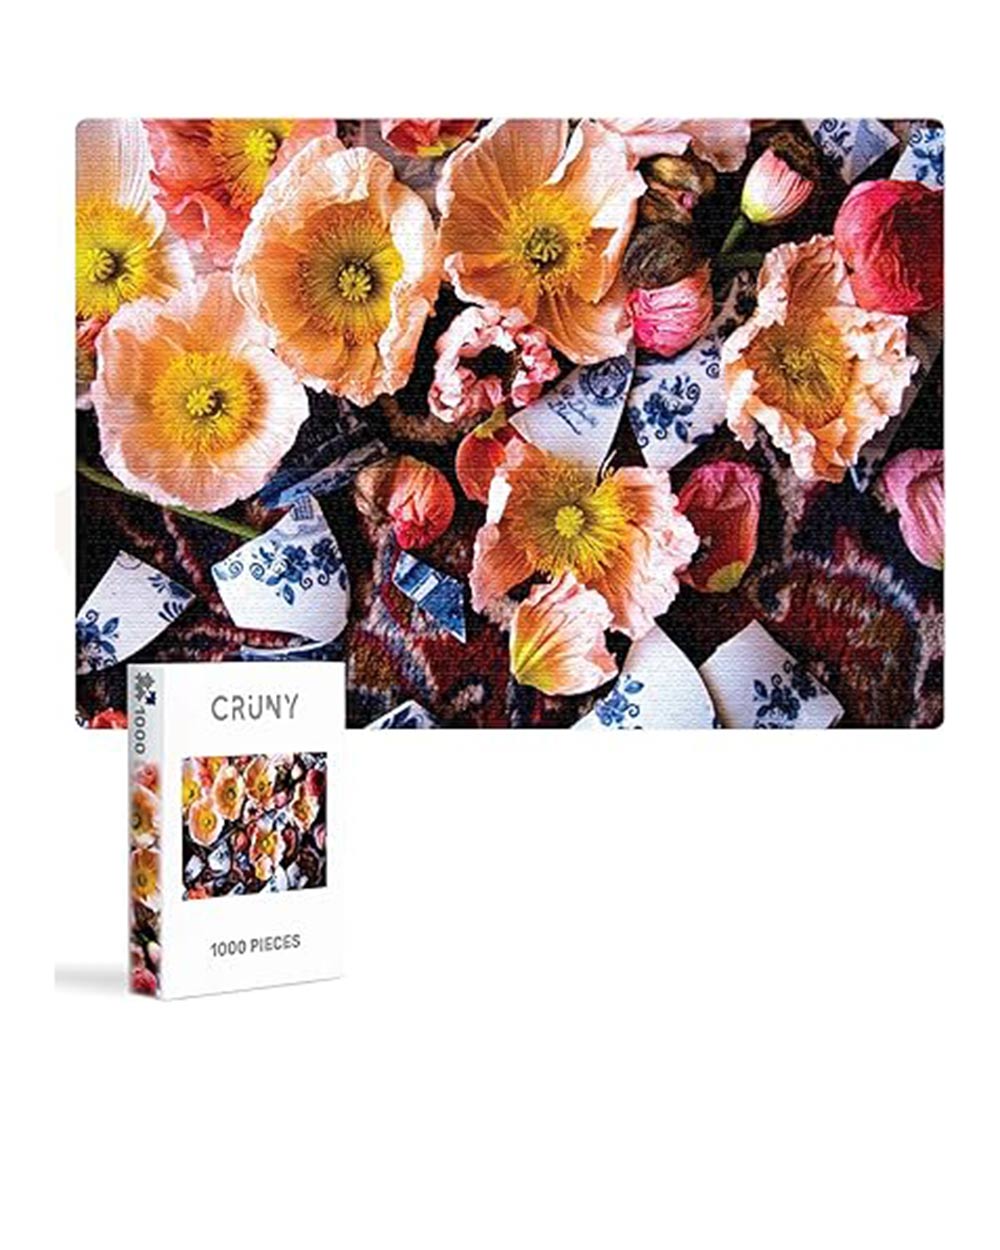 CRUNY 1000 Piece Poppies Jigsaw Puzzle for Adults